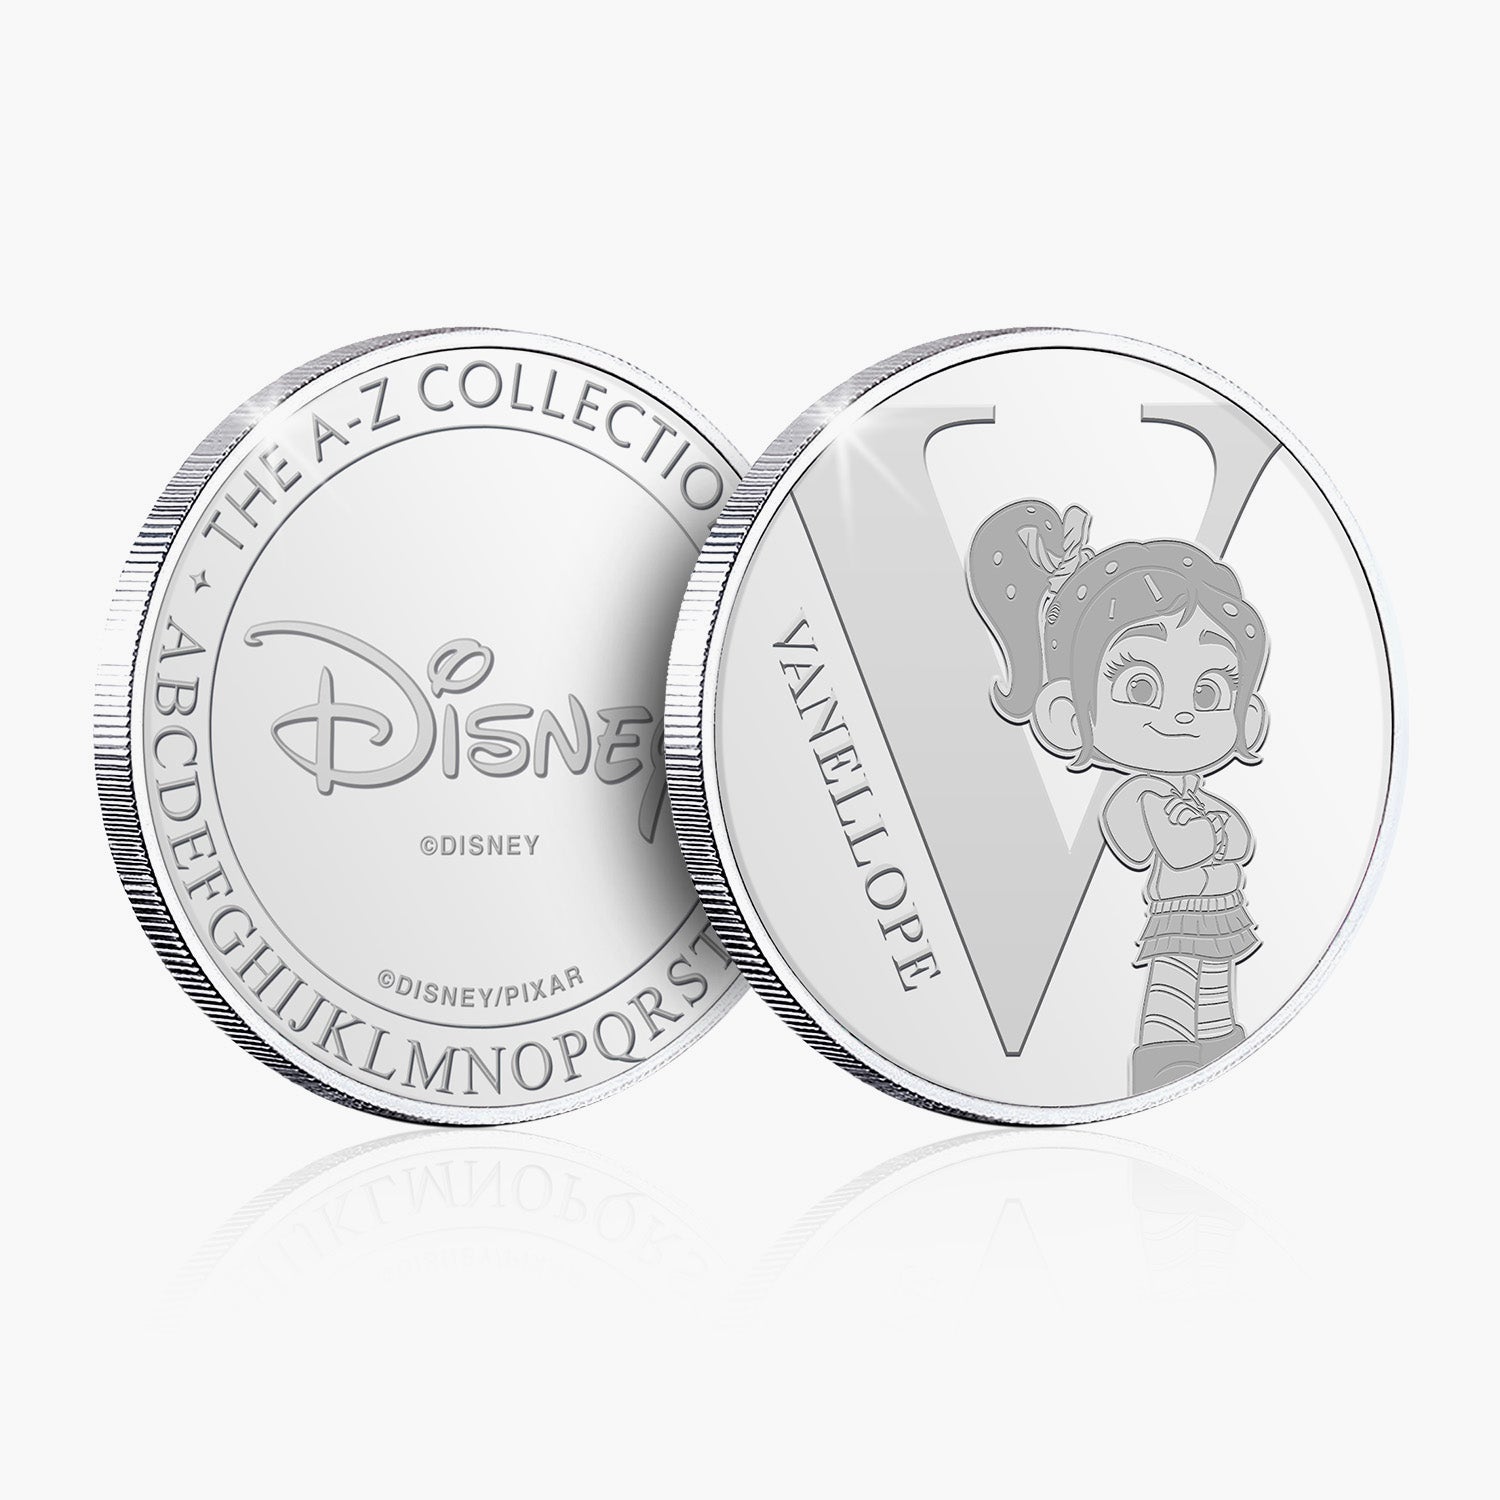 V Is For Vanellope Silver-Plated Commemorative